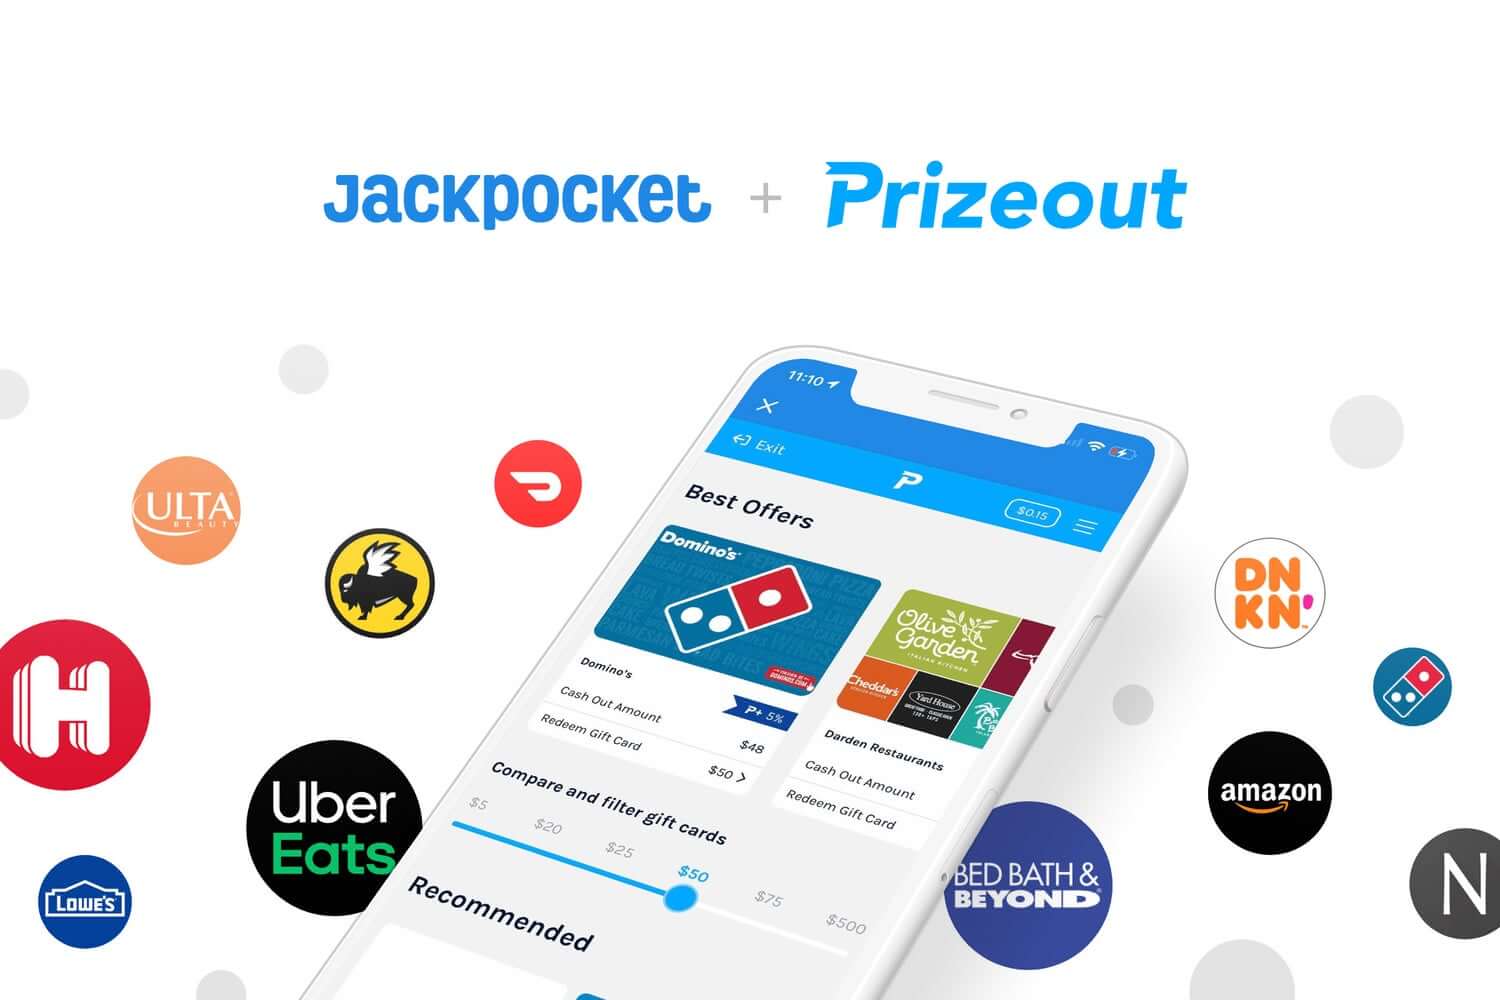 Jackpocket and Prizeout